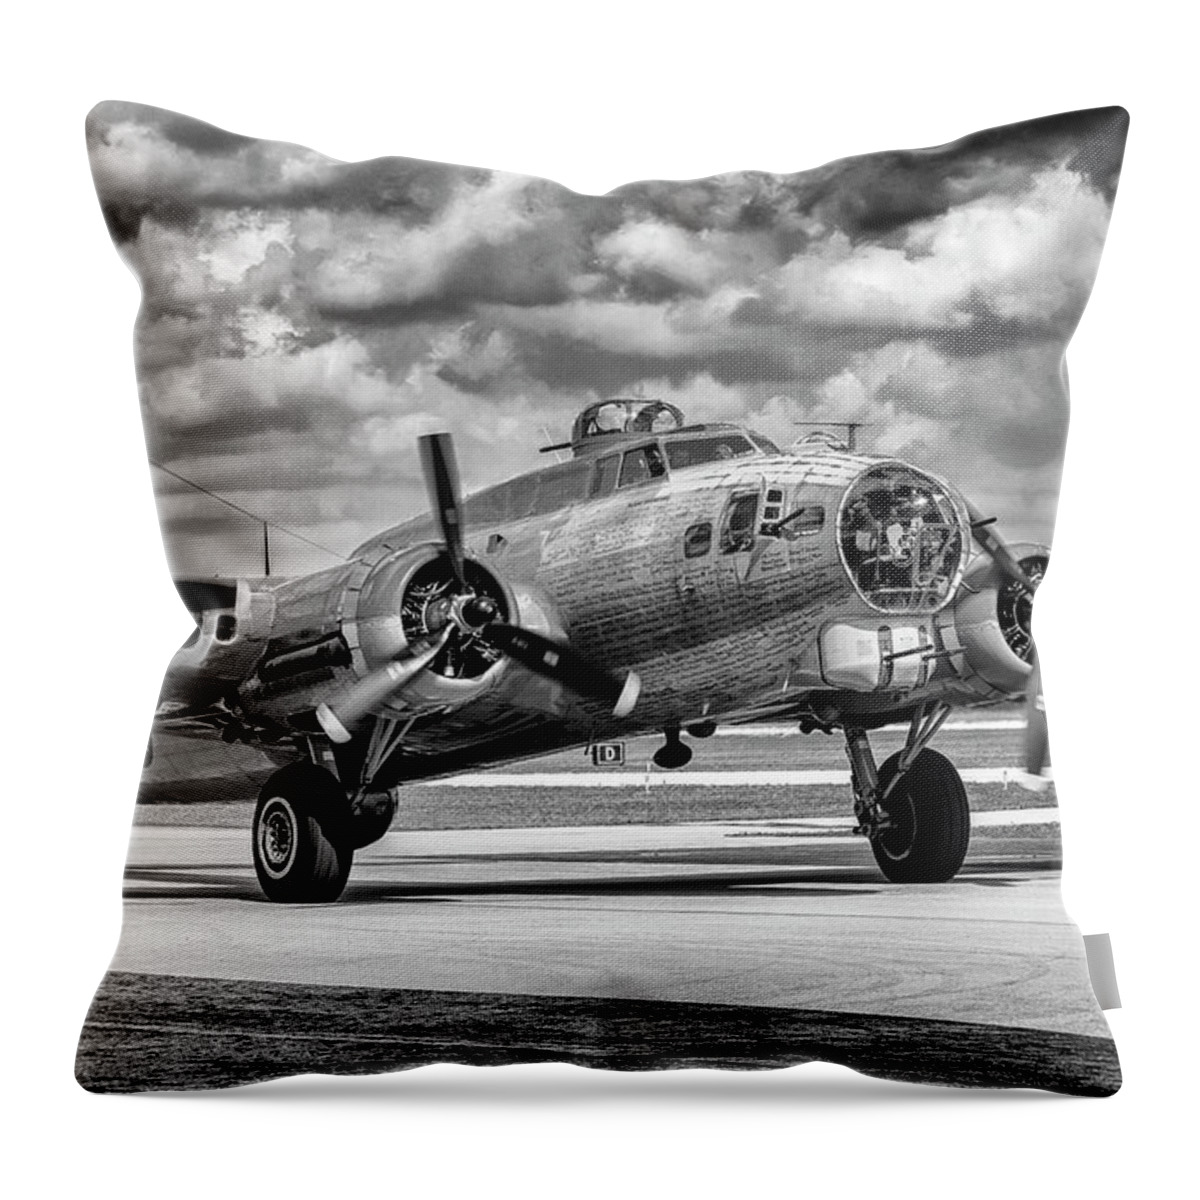 B-17 Throw Pillow featuring the photograph Red Tail Bommber by Chris Smith